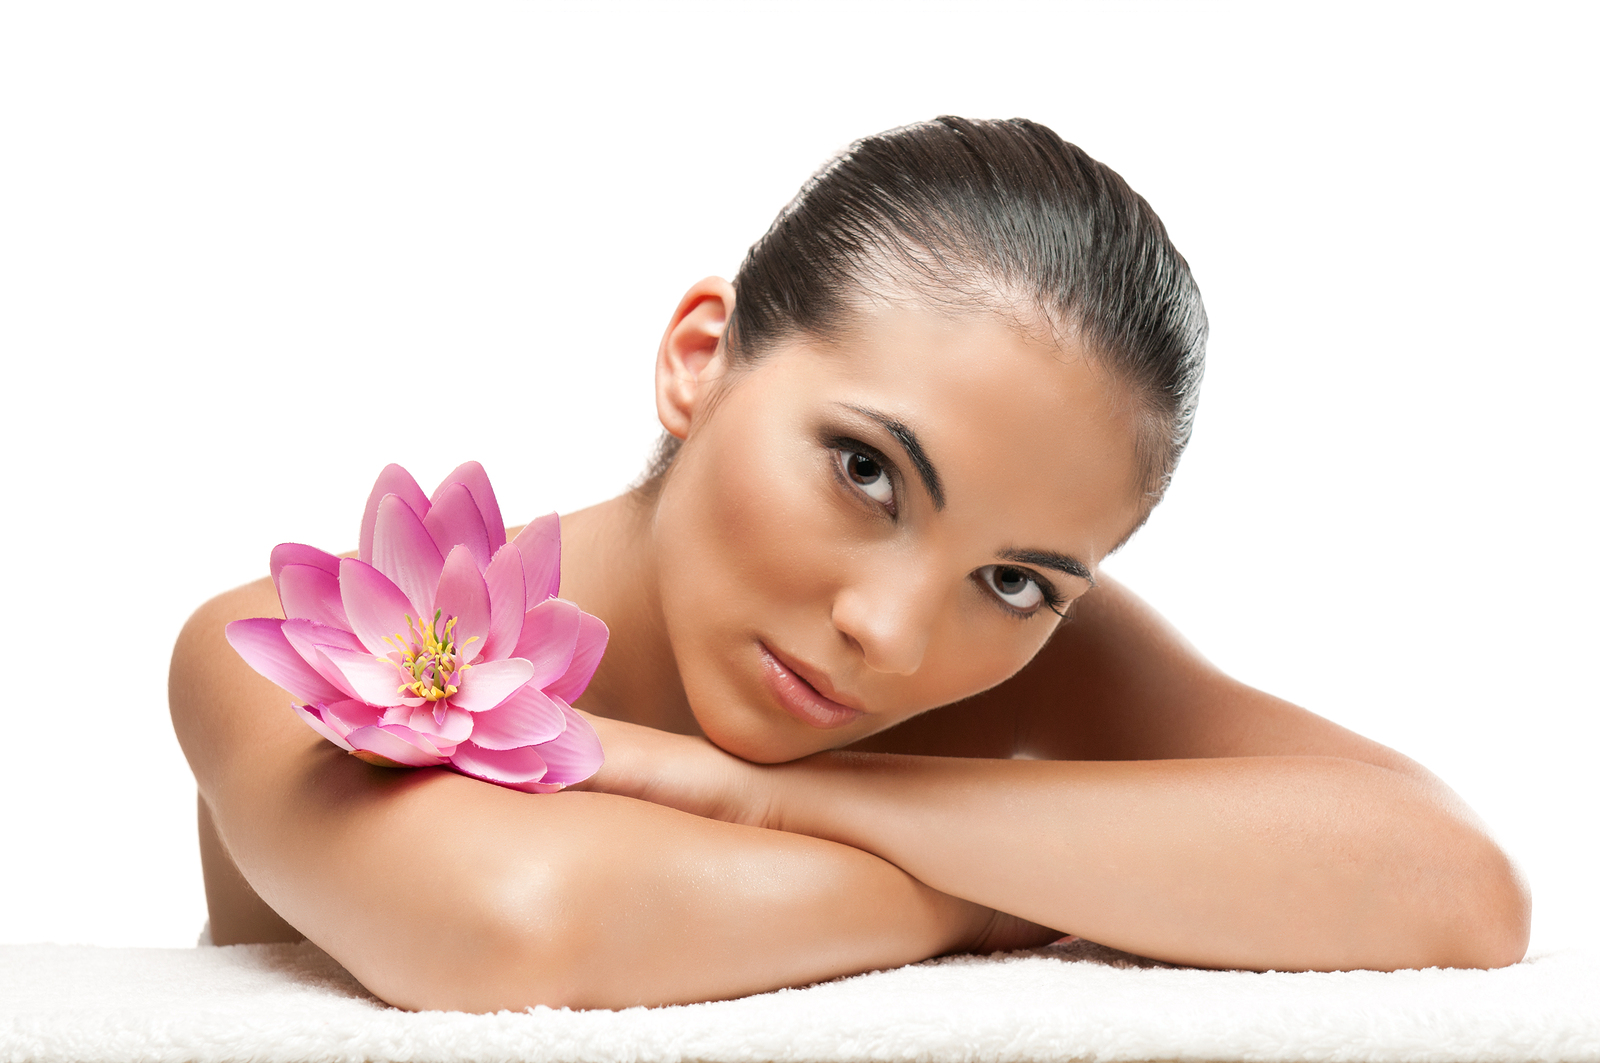 Microcurrent technology is effective for anti-aging face and body sculpting.